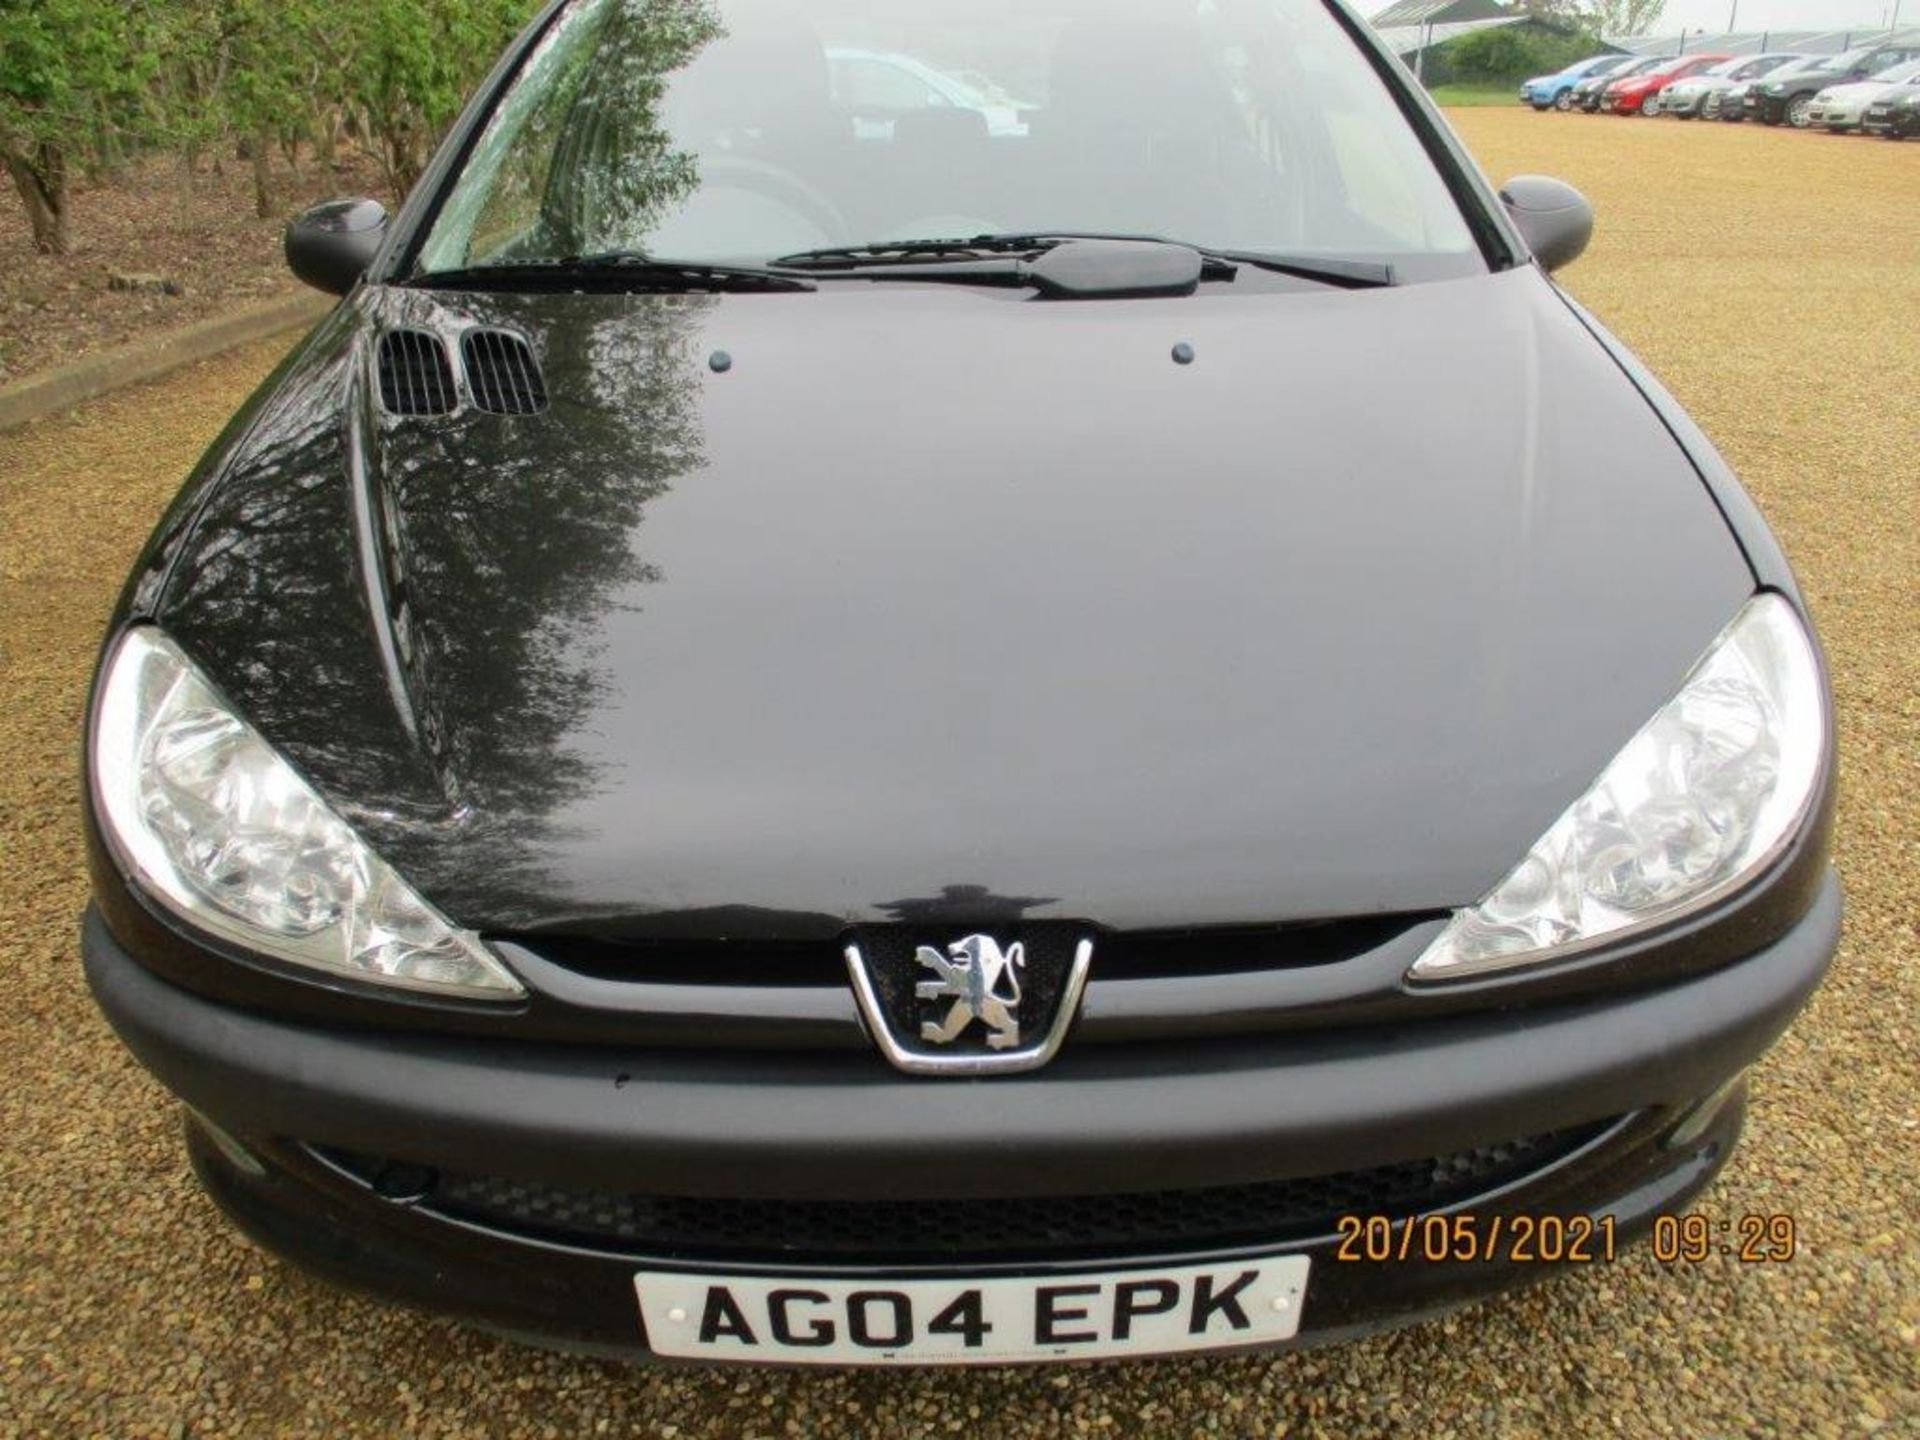 04 04 Peugeot 206 S - Image 5 of 20